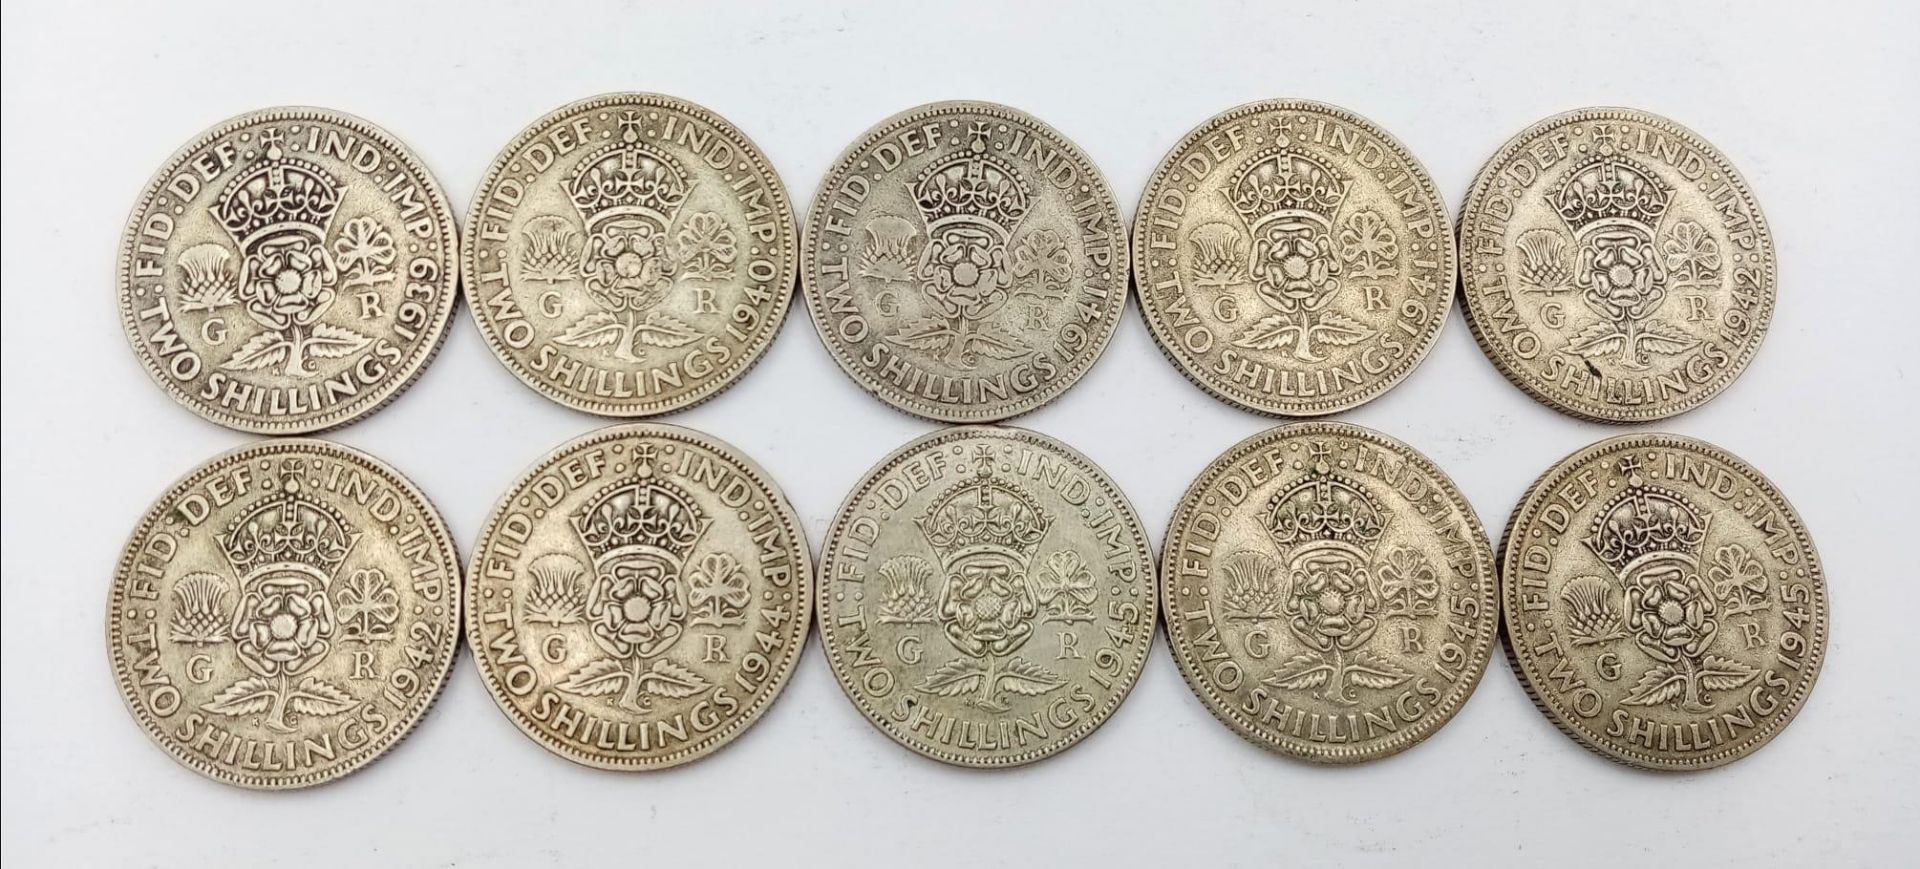 A Parcel of Ten WW2 Period Pre-1947 Silver Two Shilling Coins (florins) Dates; 1 x 1939, 1 x 1940, 2